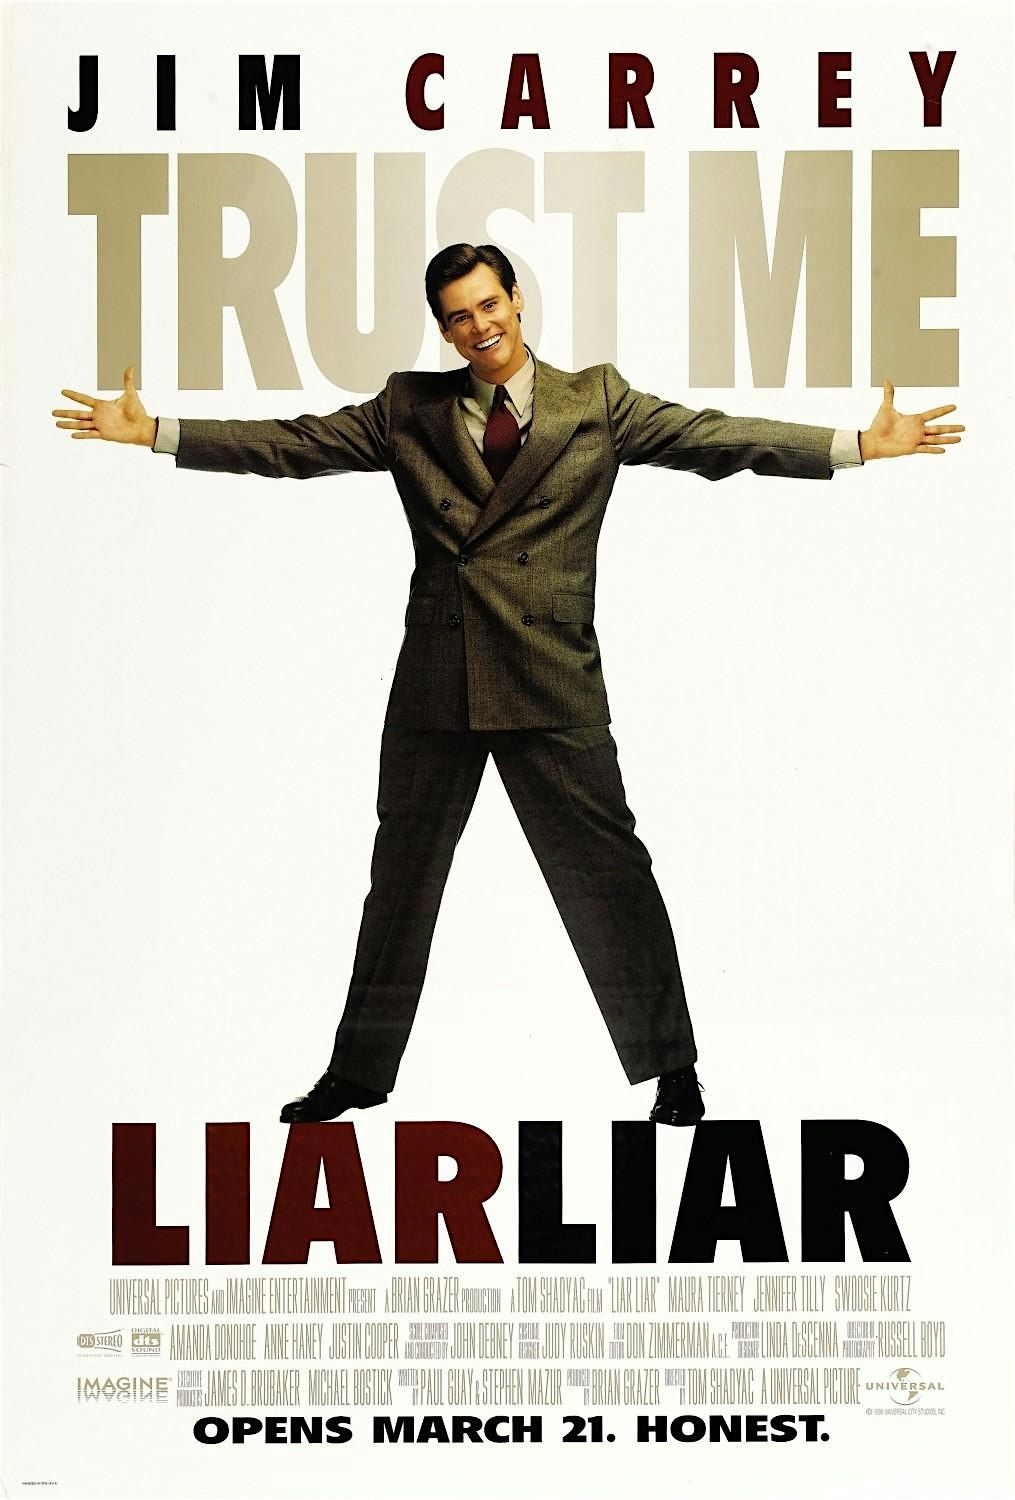 Liar, Liar classic comedy with Jim Carrey! at the Historic Select Theater!